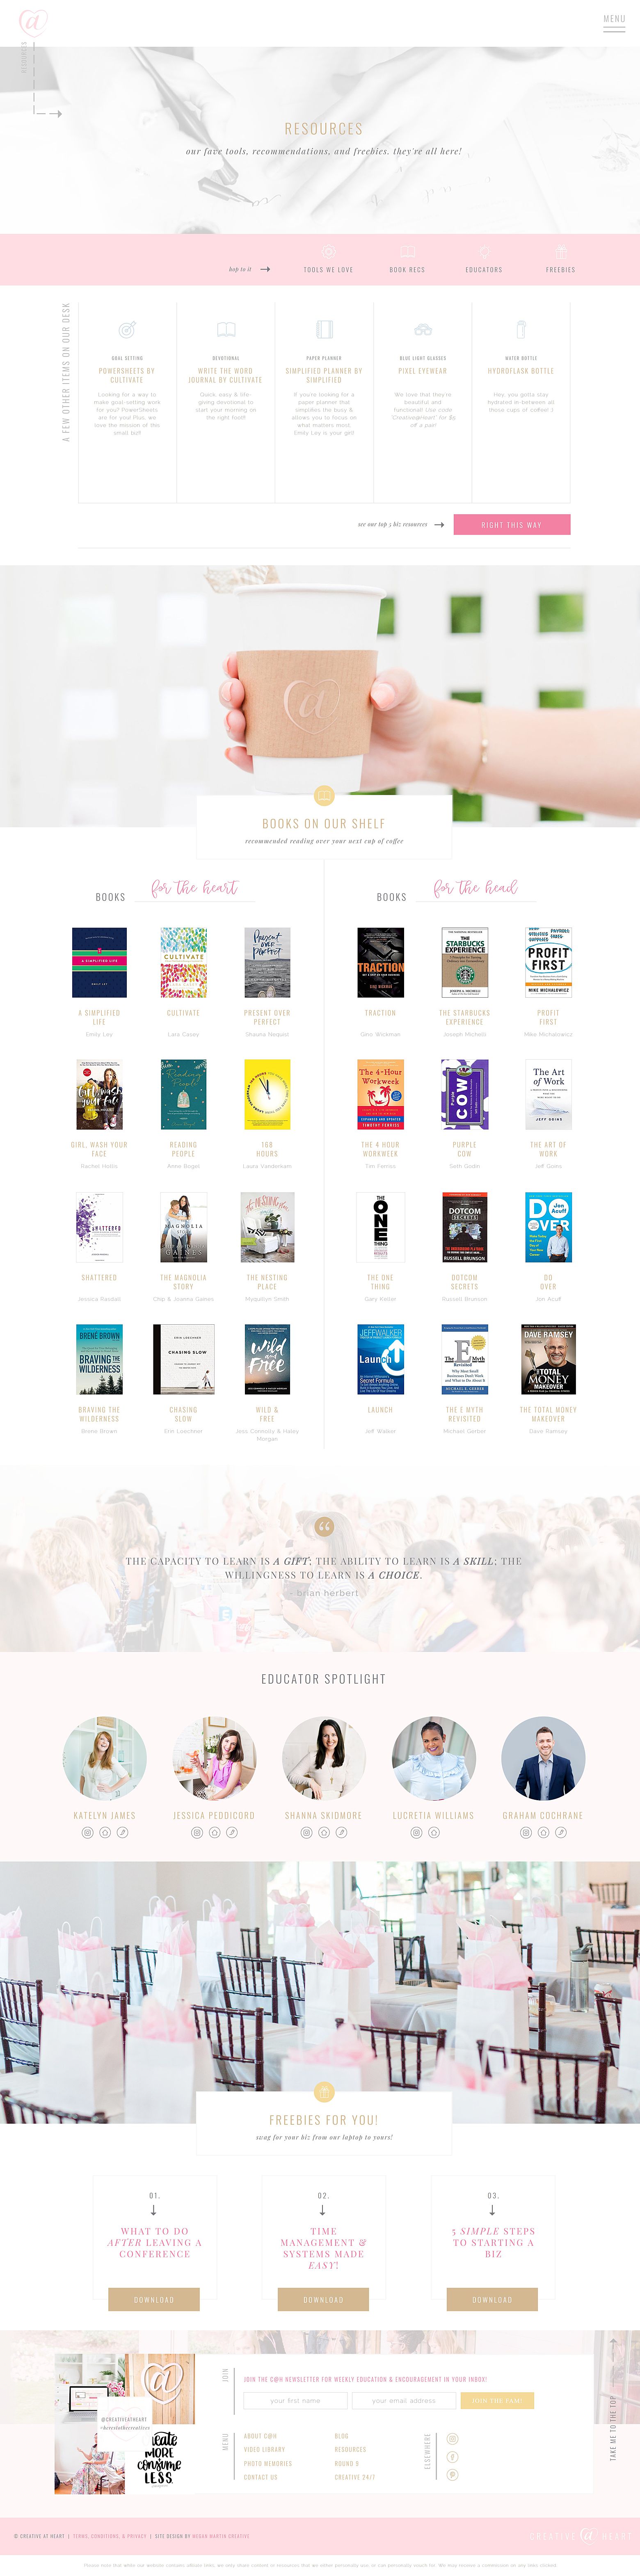 Creative at Heart Conference, showit website design, showit template, showit website template, showit 5, opt-in design, newsletter pop-up design, interact quiz, resources page design, our favorites, tools, books, business books